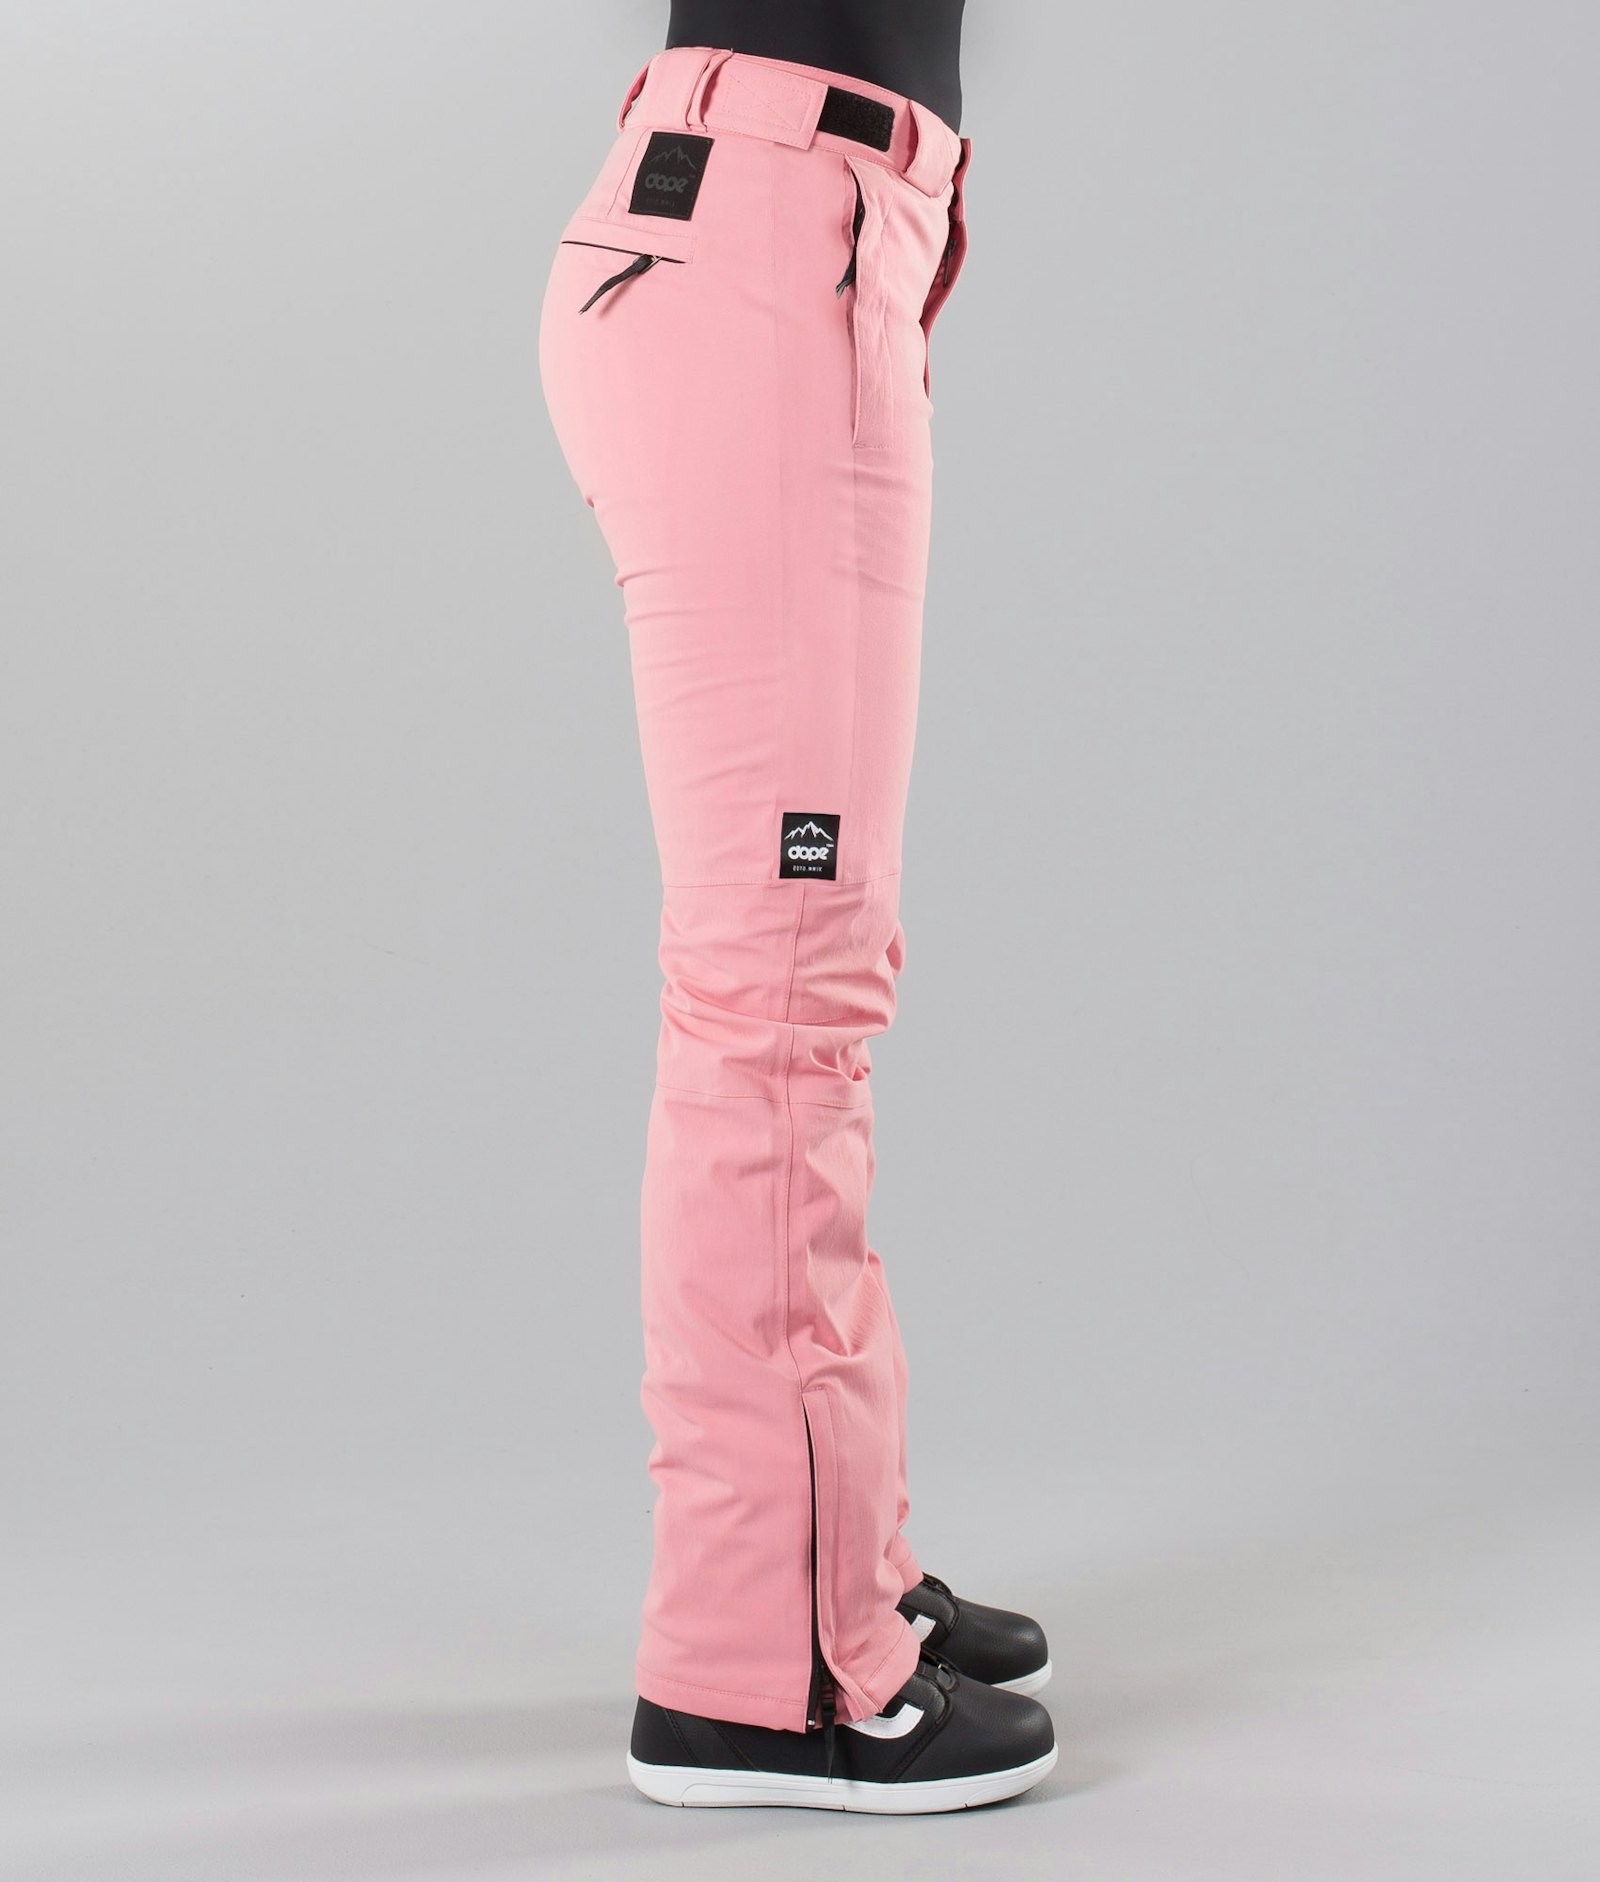 Con W 2018 Snowboard Pants Women Pink, Image 4 of 9